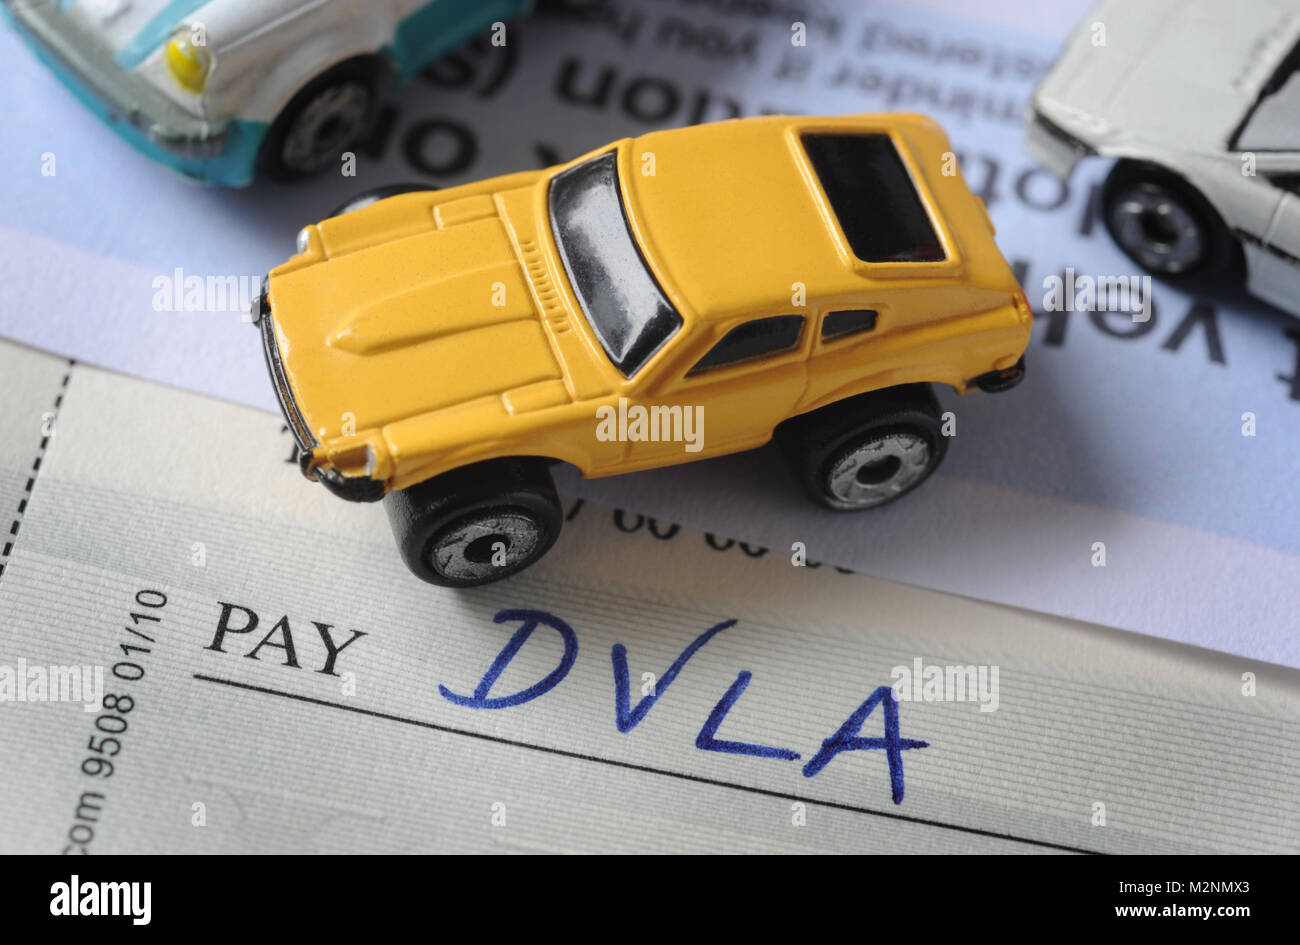 'DVLA'  WRITTEN ON CHEQUE BOOK WITH MODEL CAR RE DVLA DRIVER VEHICLE LICENSING AGENCY ROAD TAX EXCISE LICENSE MOTORISTS ETC Stock Photo